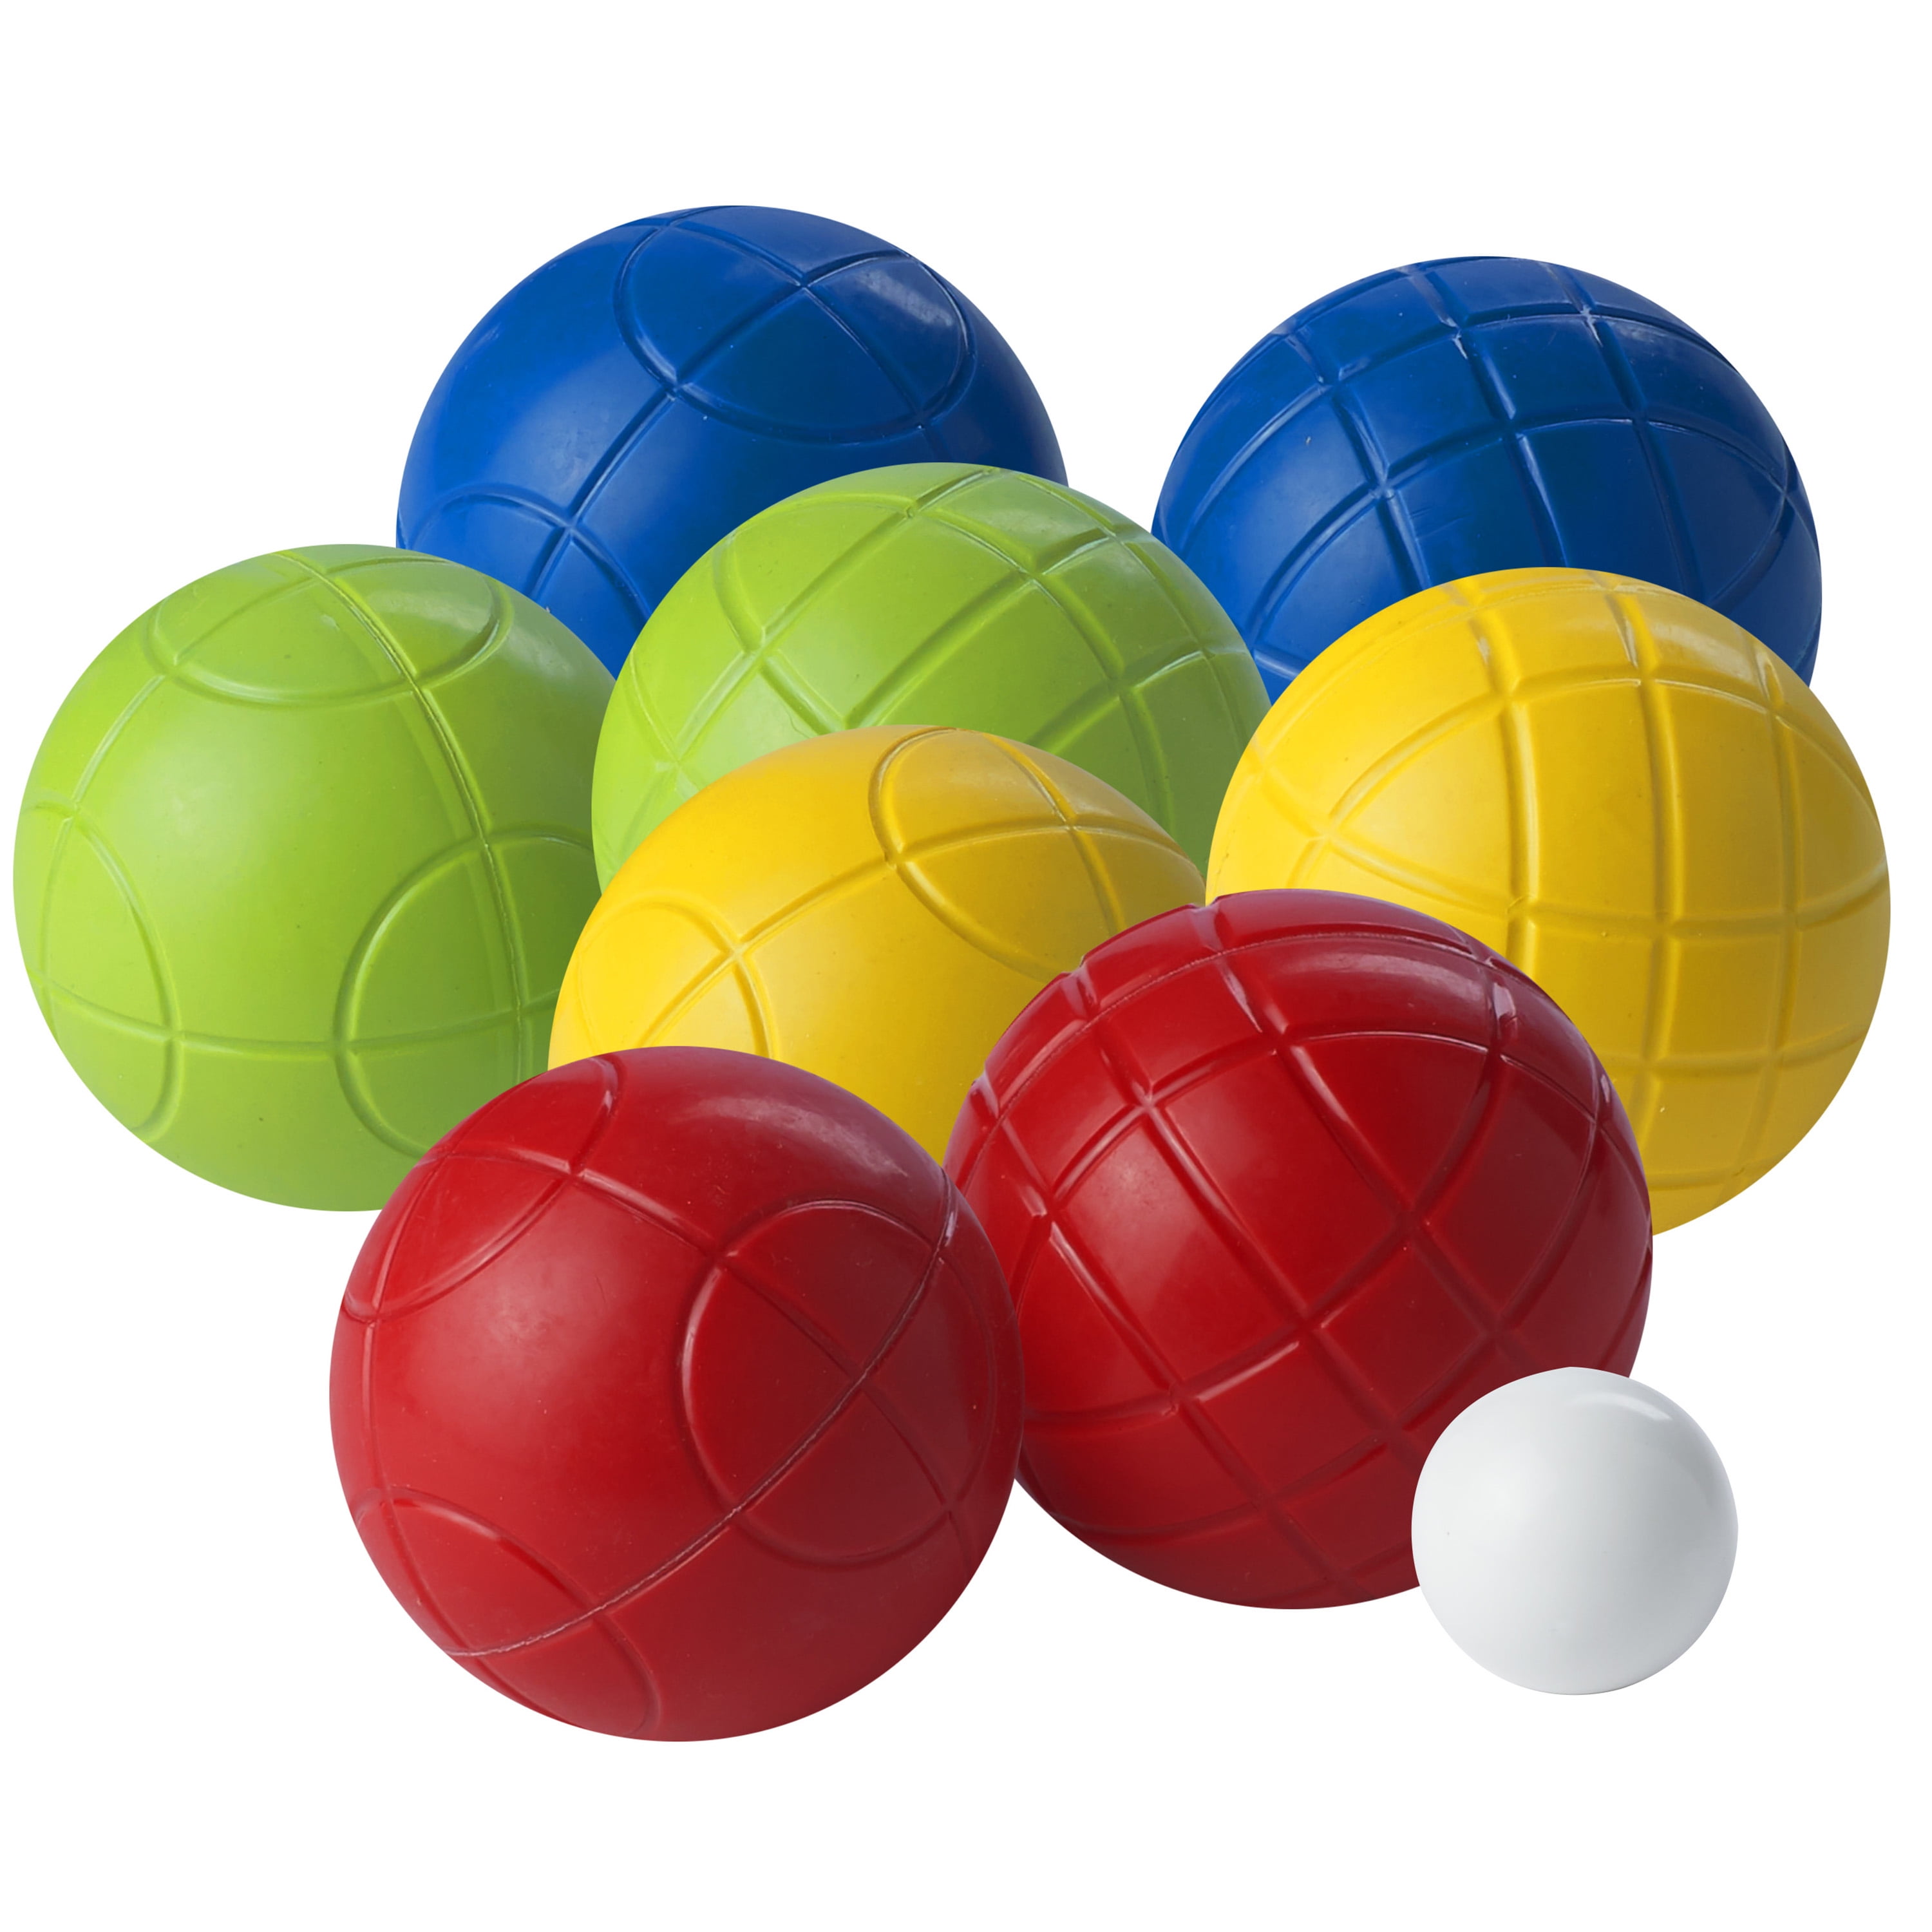 Beach and Lawn Regulation Bocce Balls and Pallino Franklin Sports Bocce Sets 